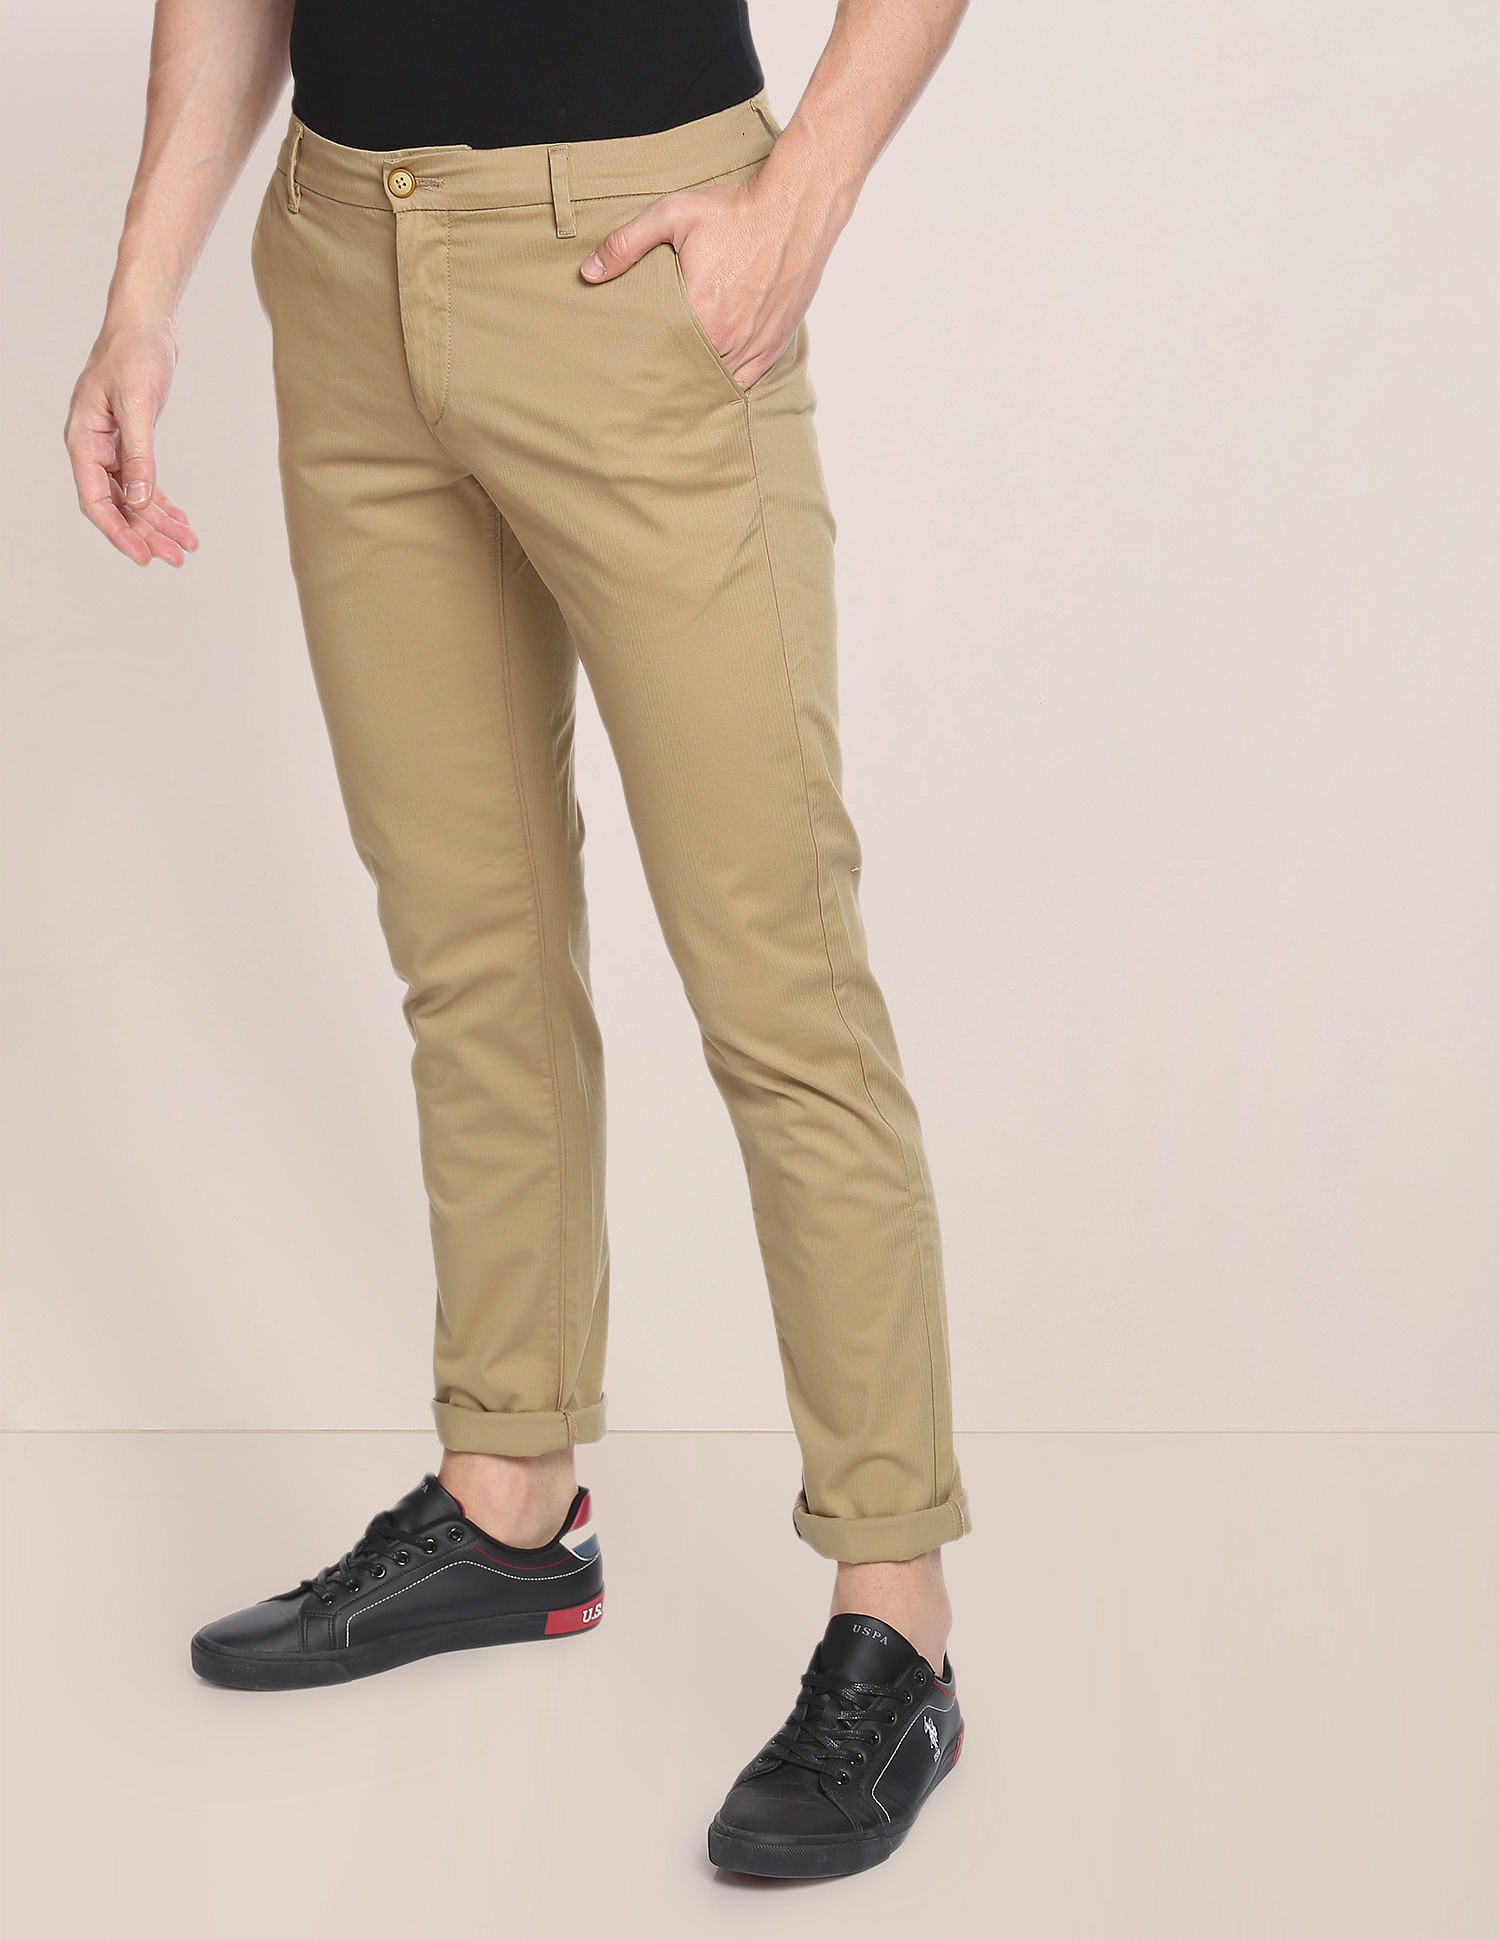 US Polo Assn Mens Casual Trousers  Fashion Marketplace India  Fashion  Reseller Hub